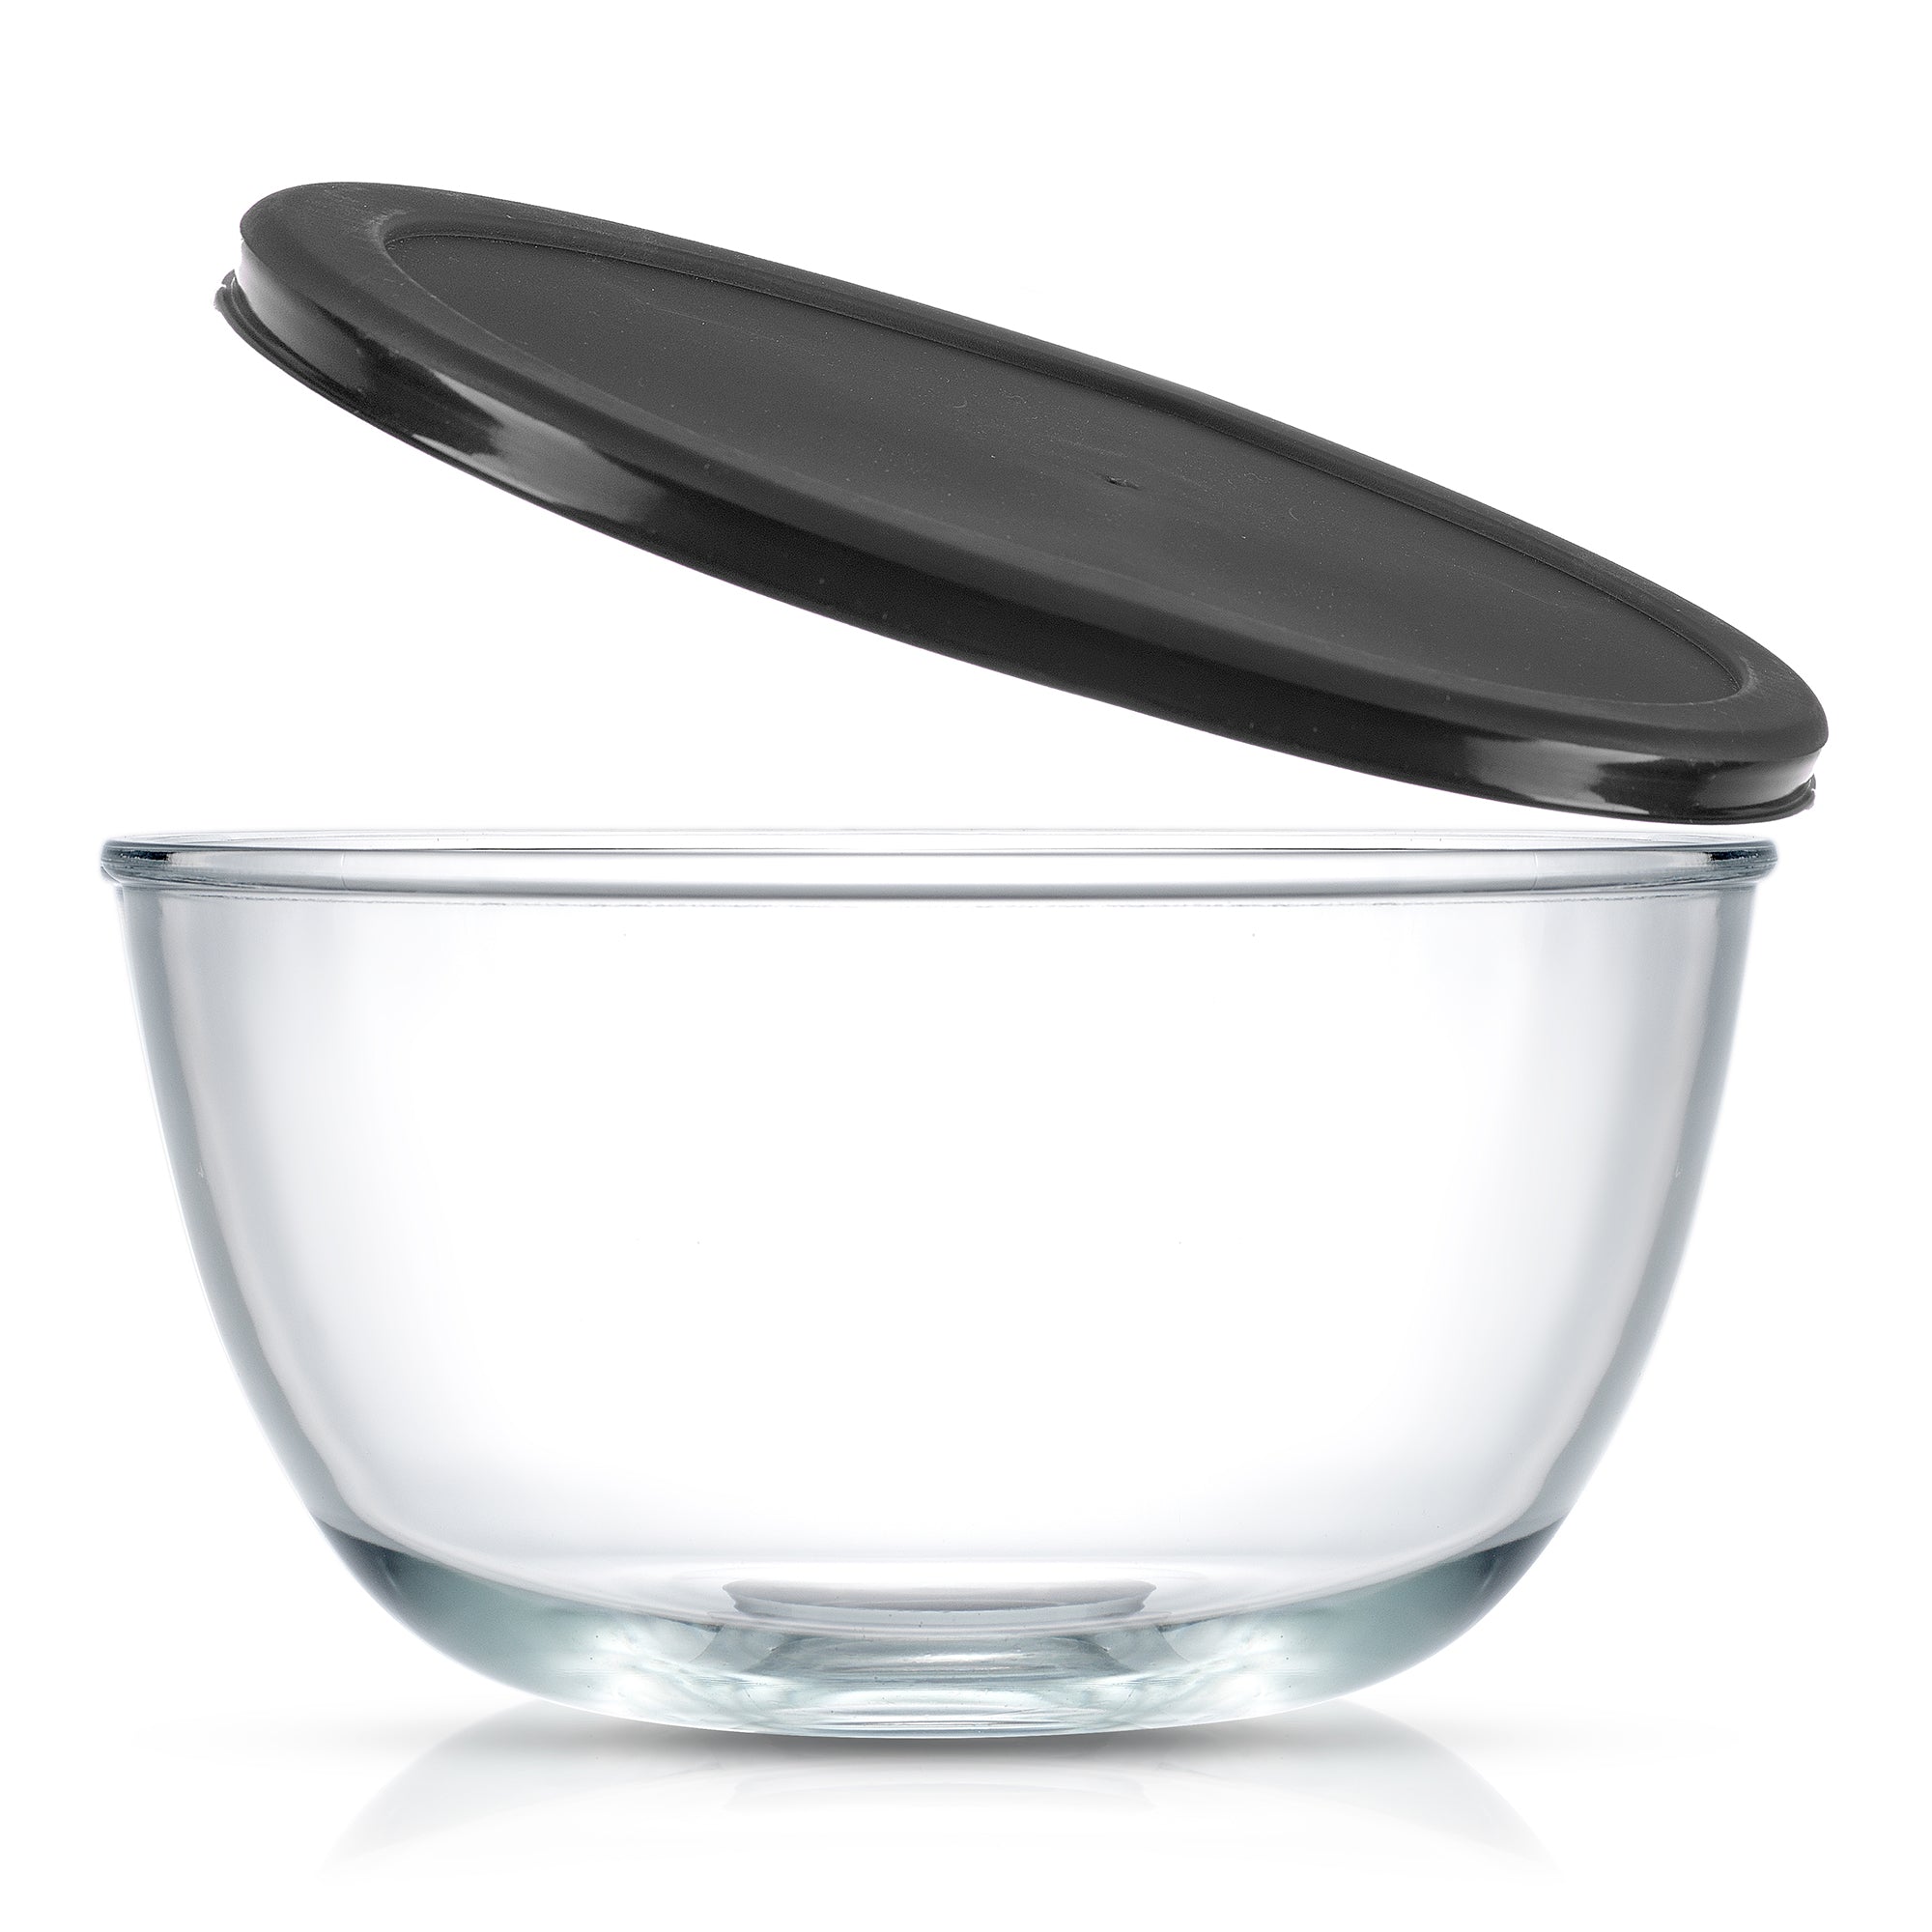 Glass bowl with black lid - JoyJolt 4 Large Glass Mixing Bowls With Lids.